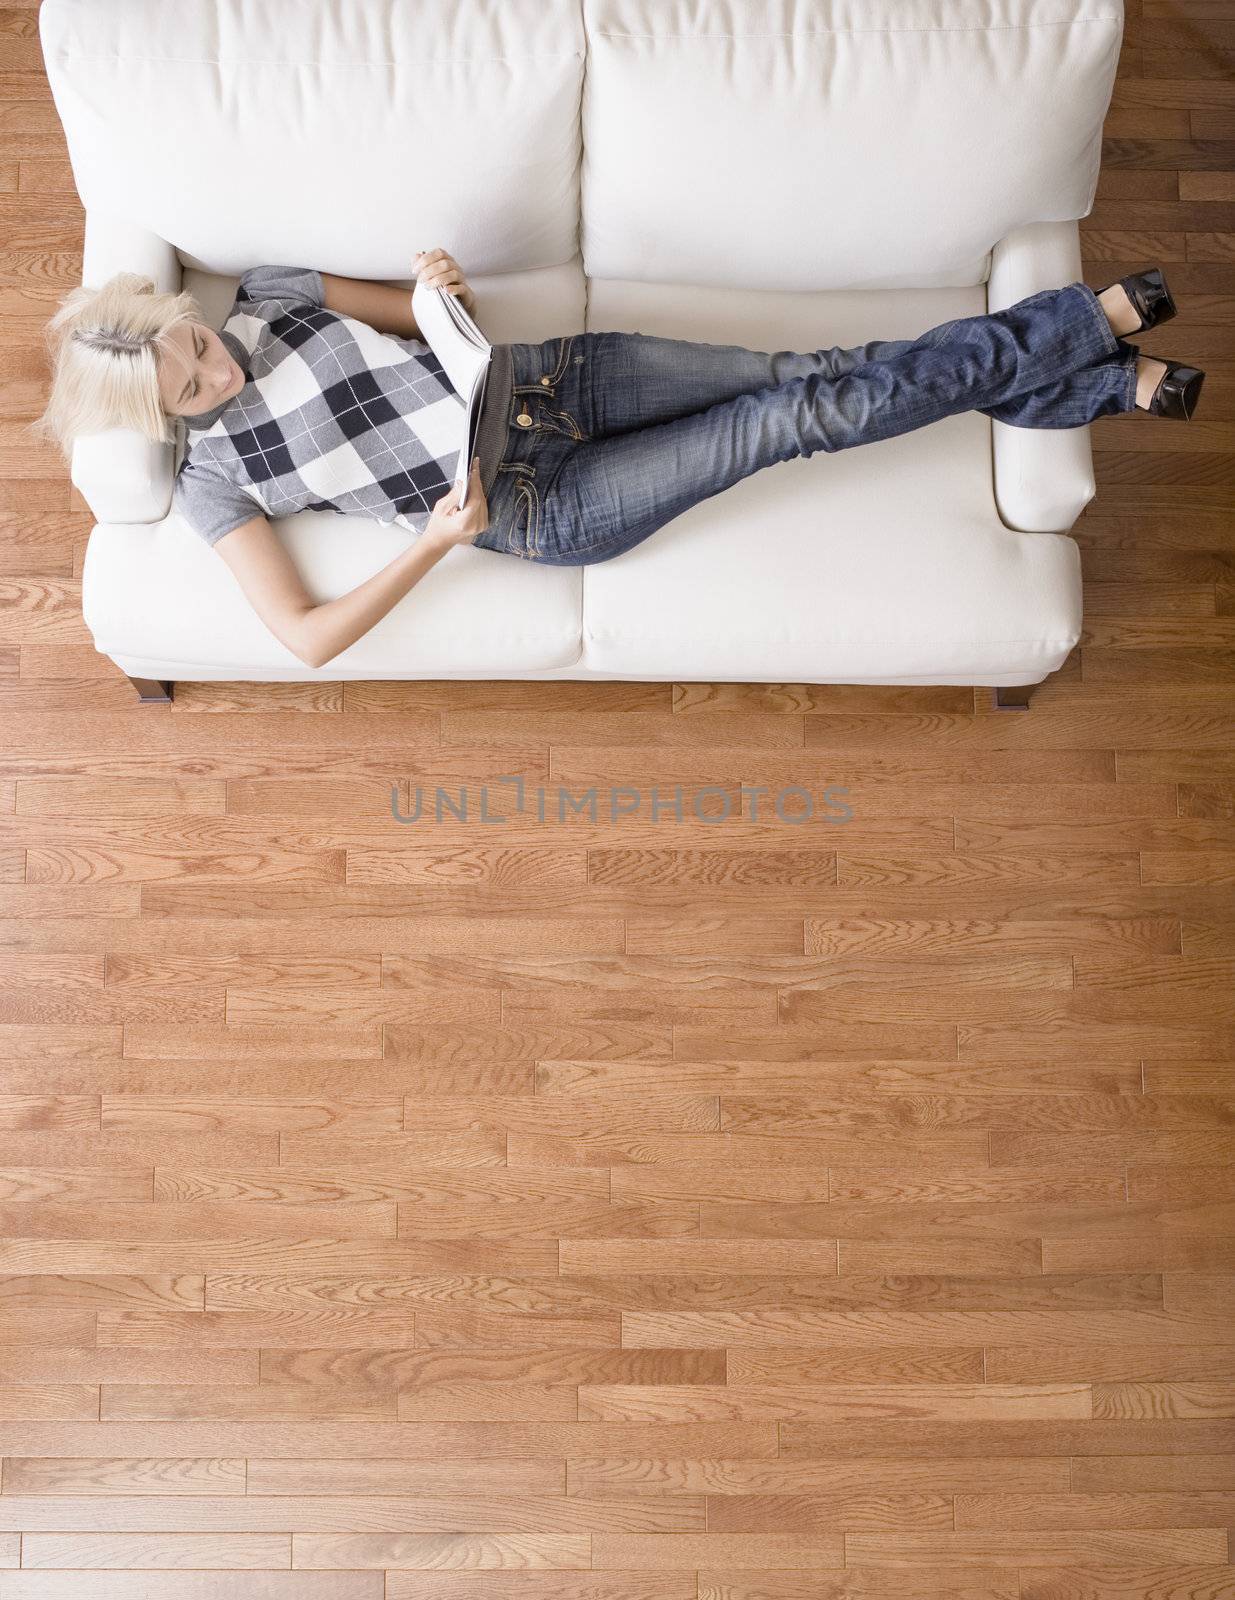 Full length overhead view of woman reclining and reading on white couch. Vertical format.